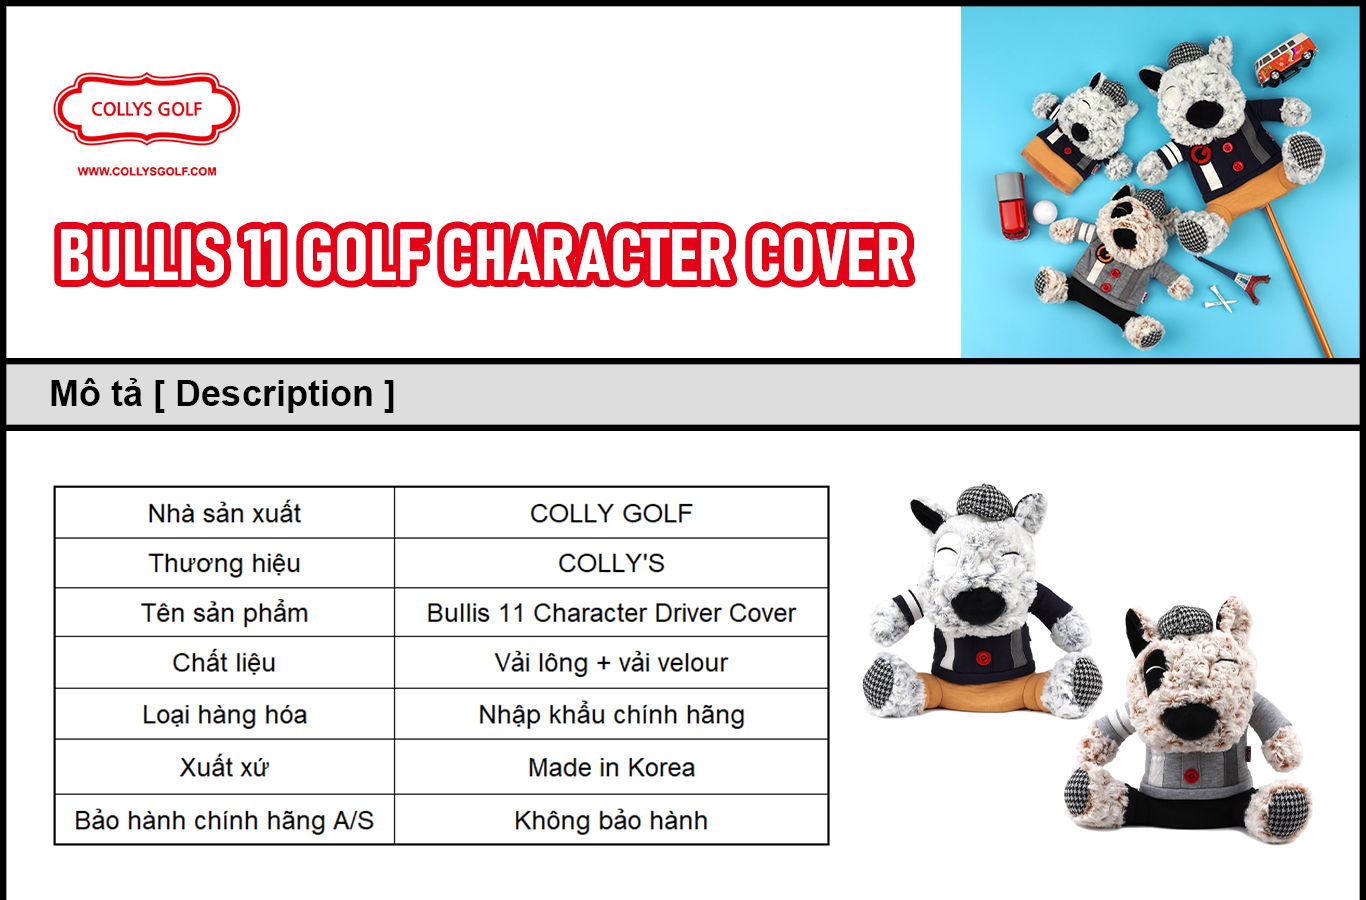 collys_bullis_11_golf_character_driver_cover_1